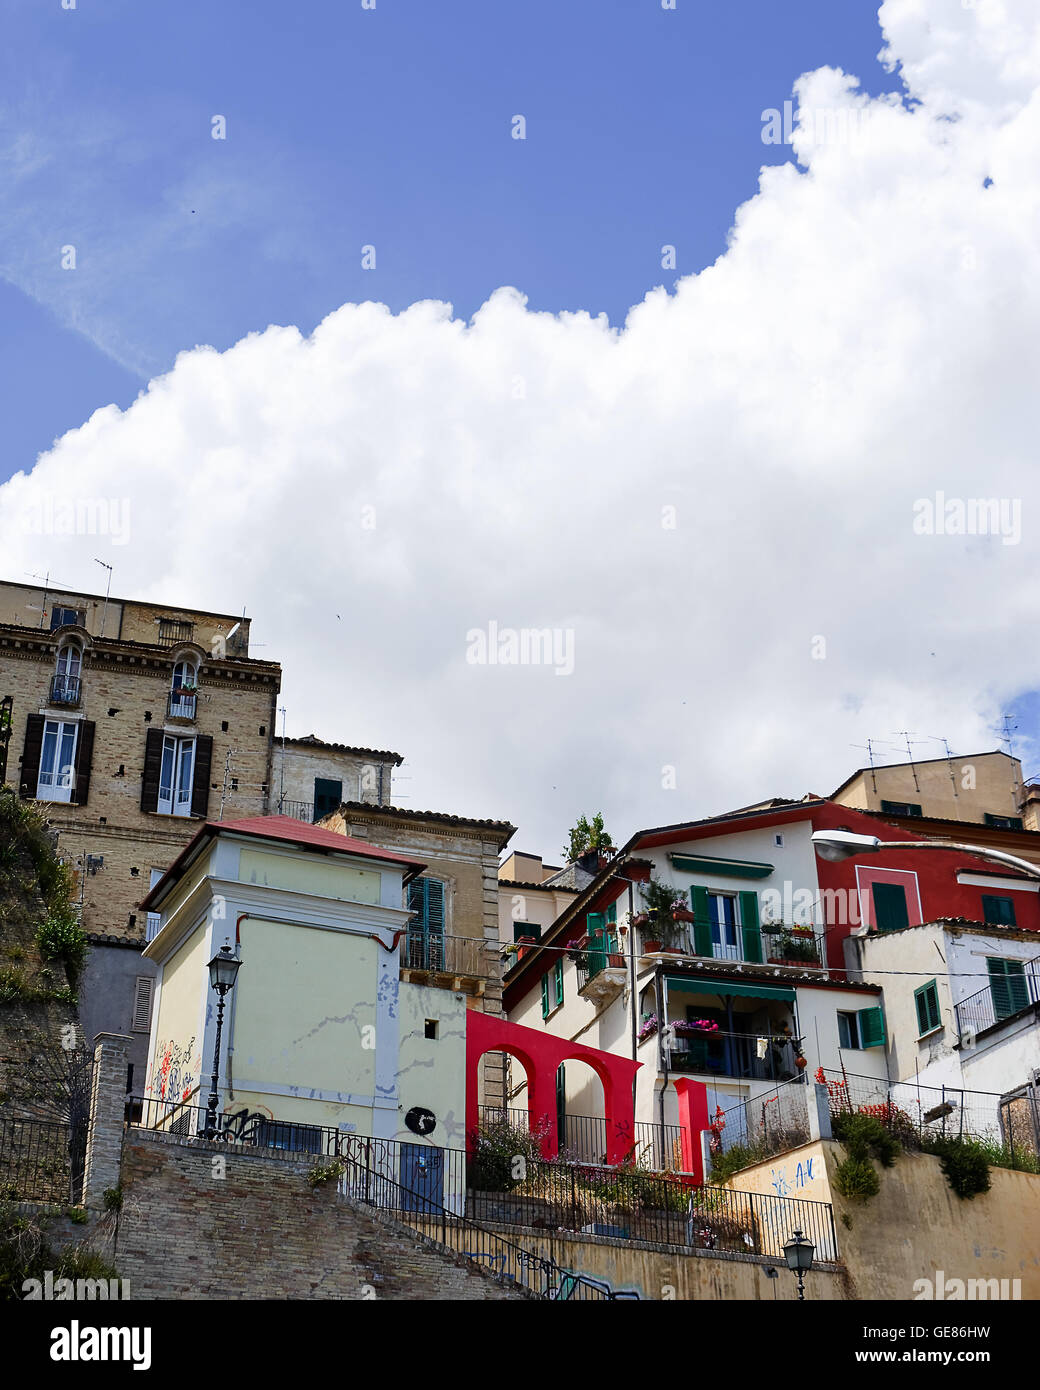 Chieti, Italy - 04 June 2016: District of Chieti with nobody in a sunny day at 04 June Stock Photo